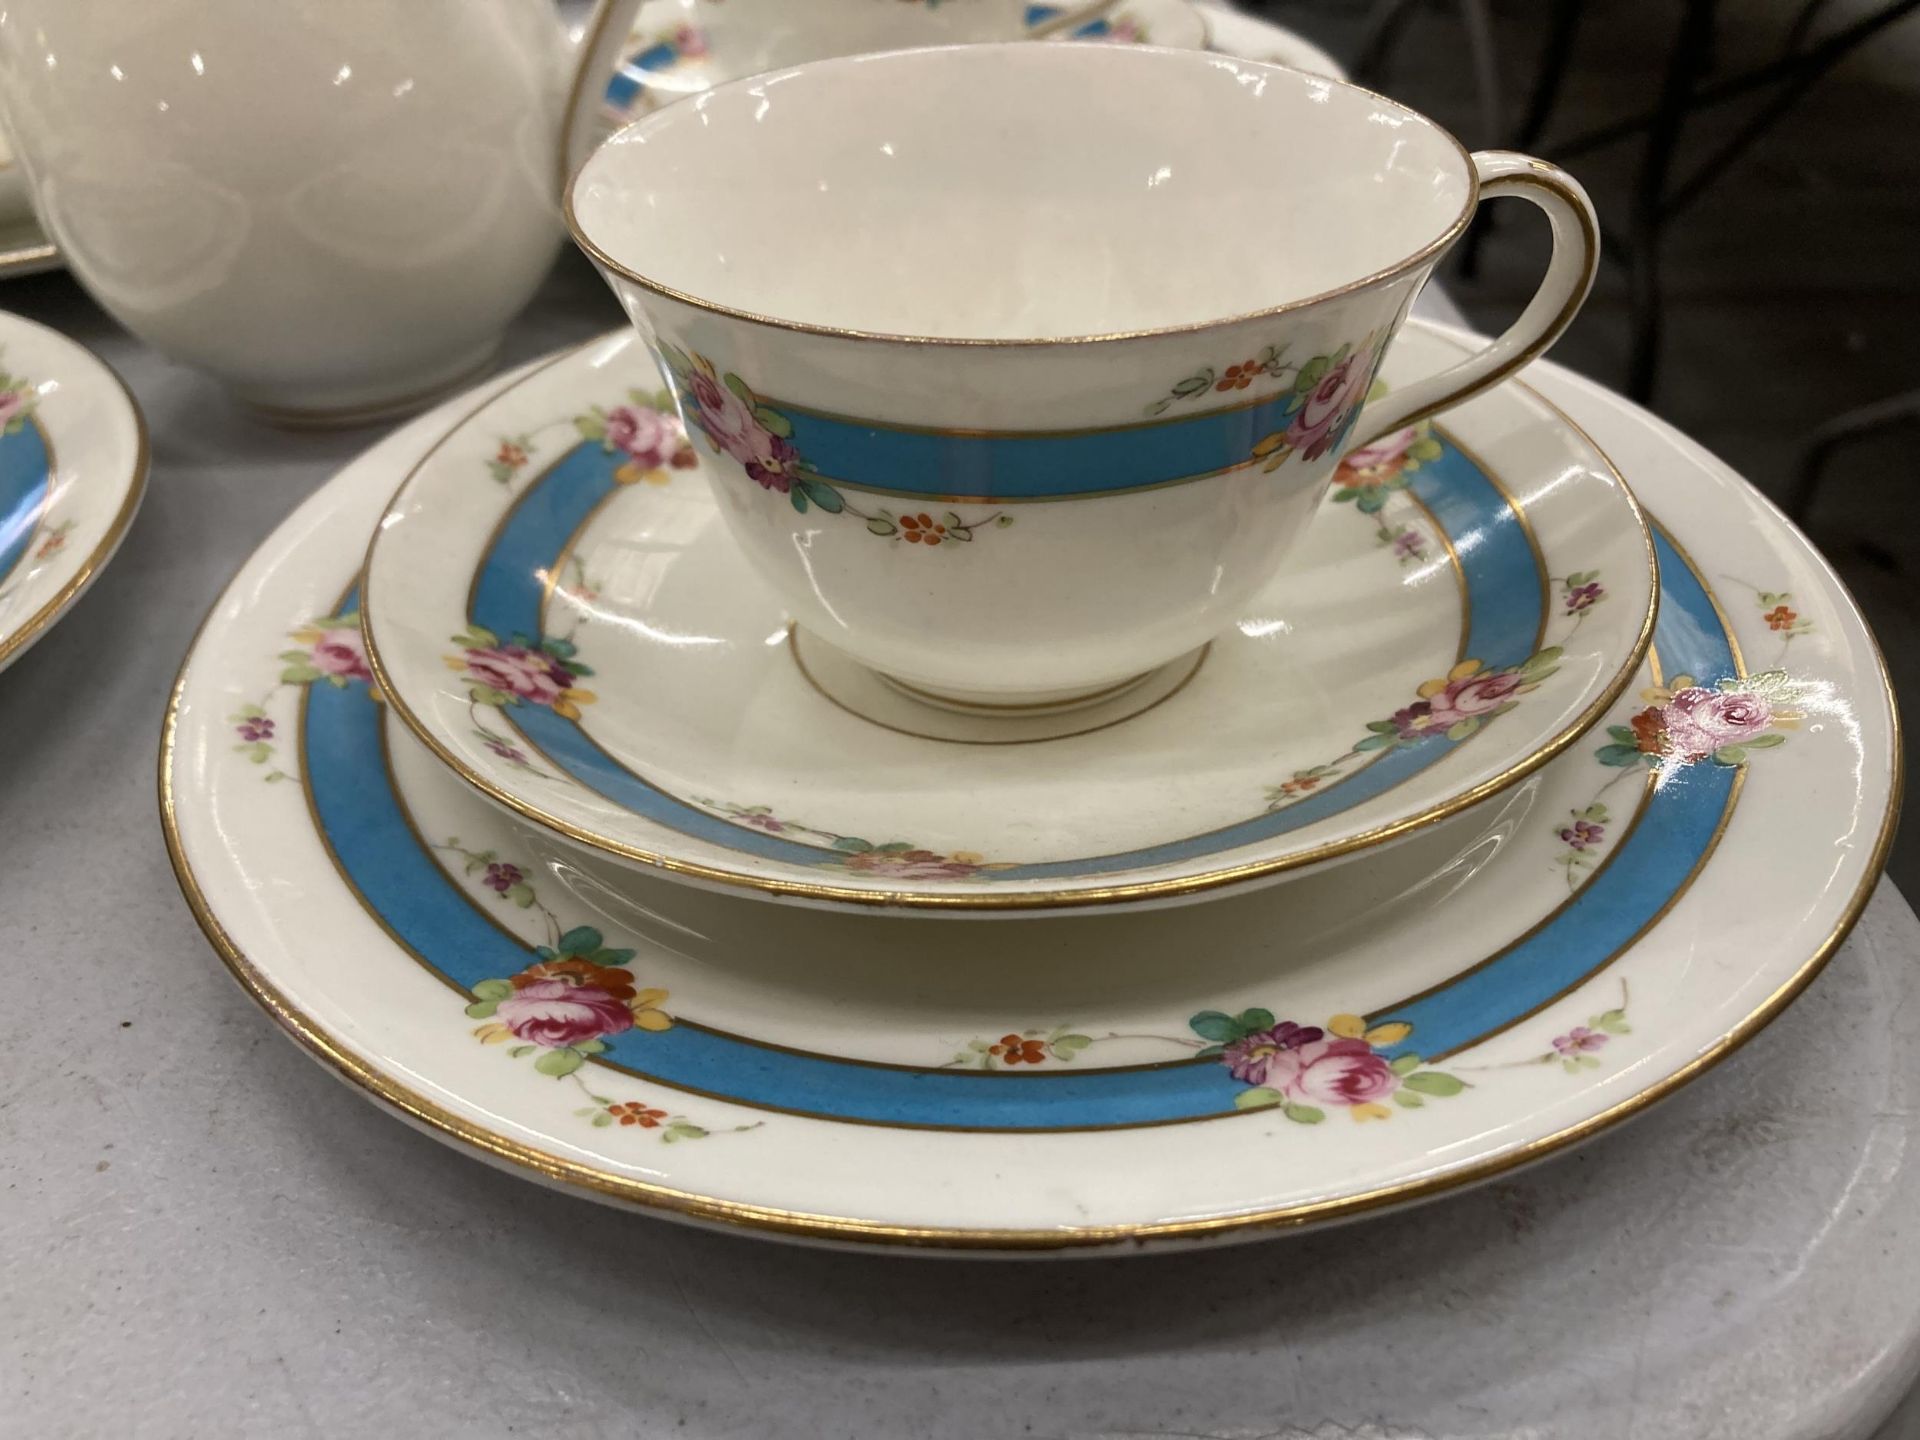 A LARGE QUANTITY OF VINTAGE CROWN STAFFORDSHIRE CHINA CUPS, SAUCERS, SIDE PLATES, A CREAM JUG, SUGAR - Image 2 of 4